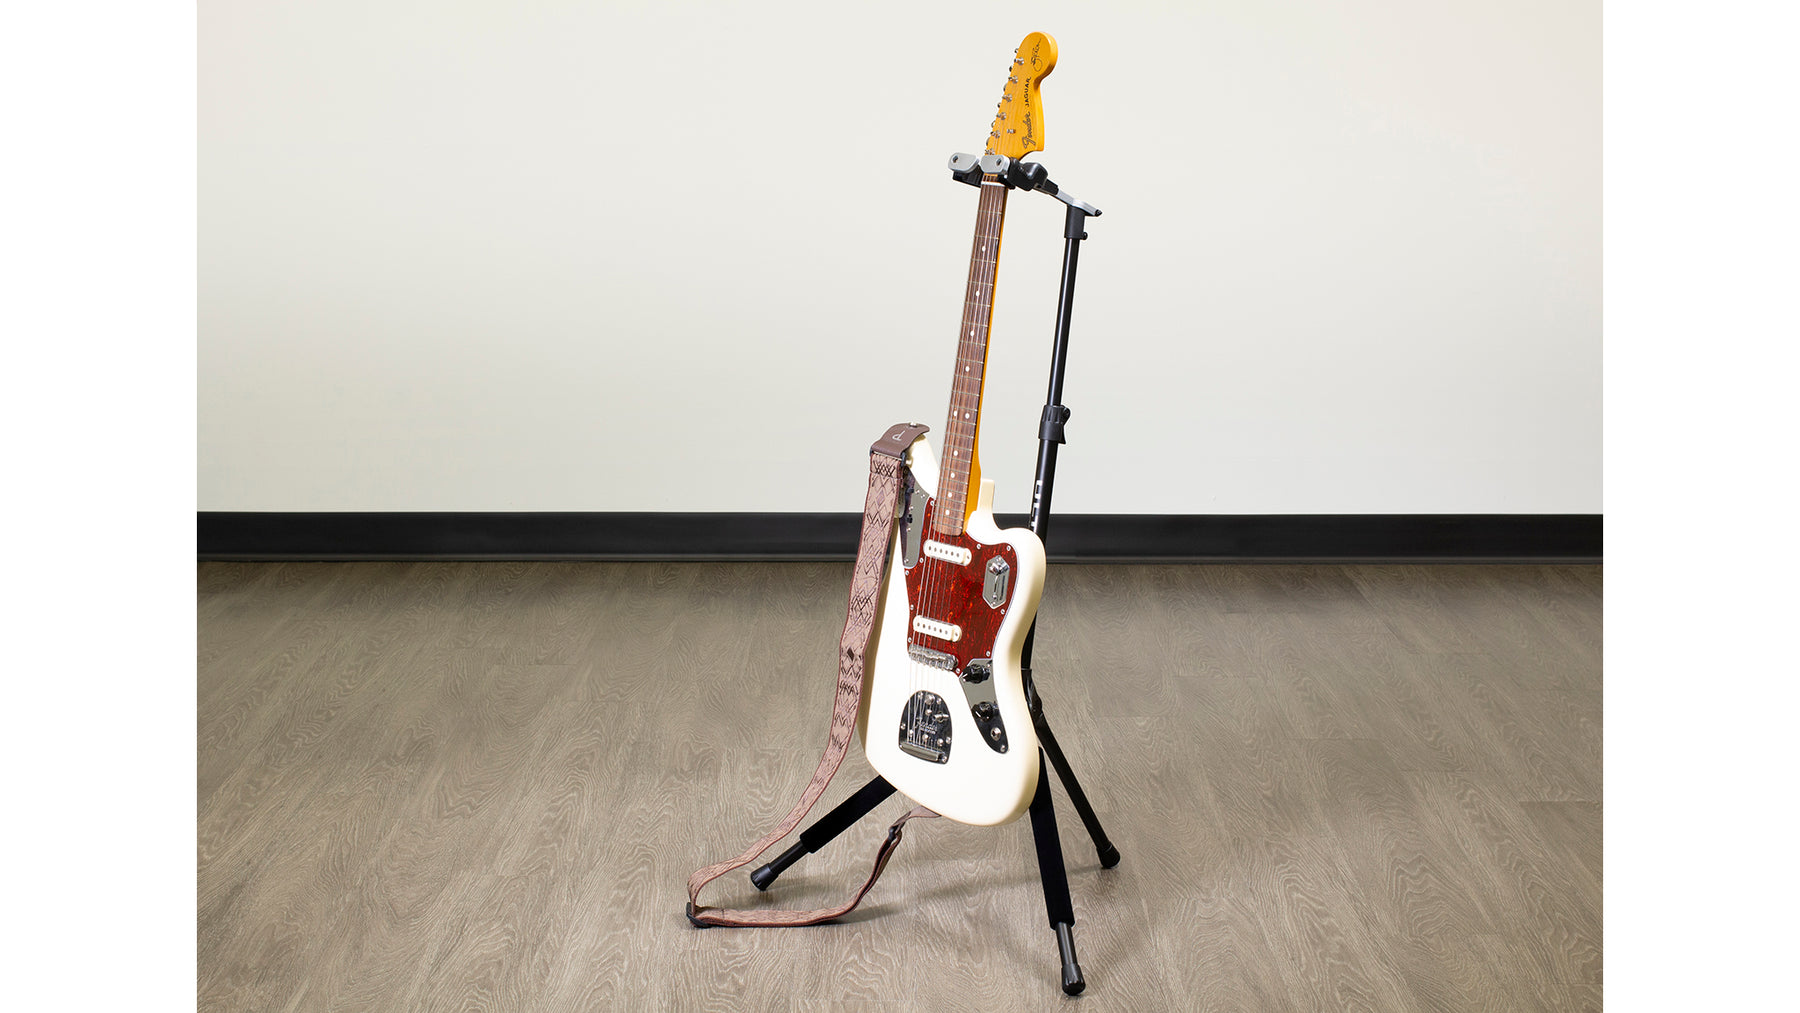 Fender - Stand Universel Guitare Electrique Stands Guitare 